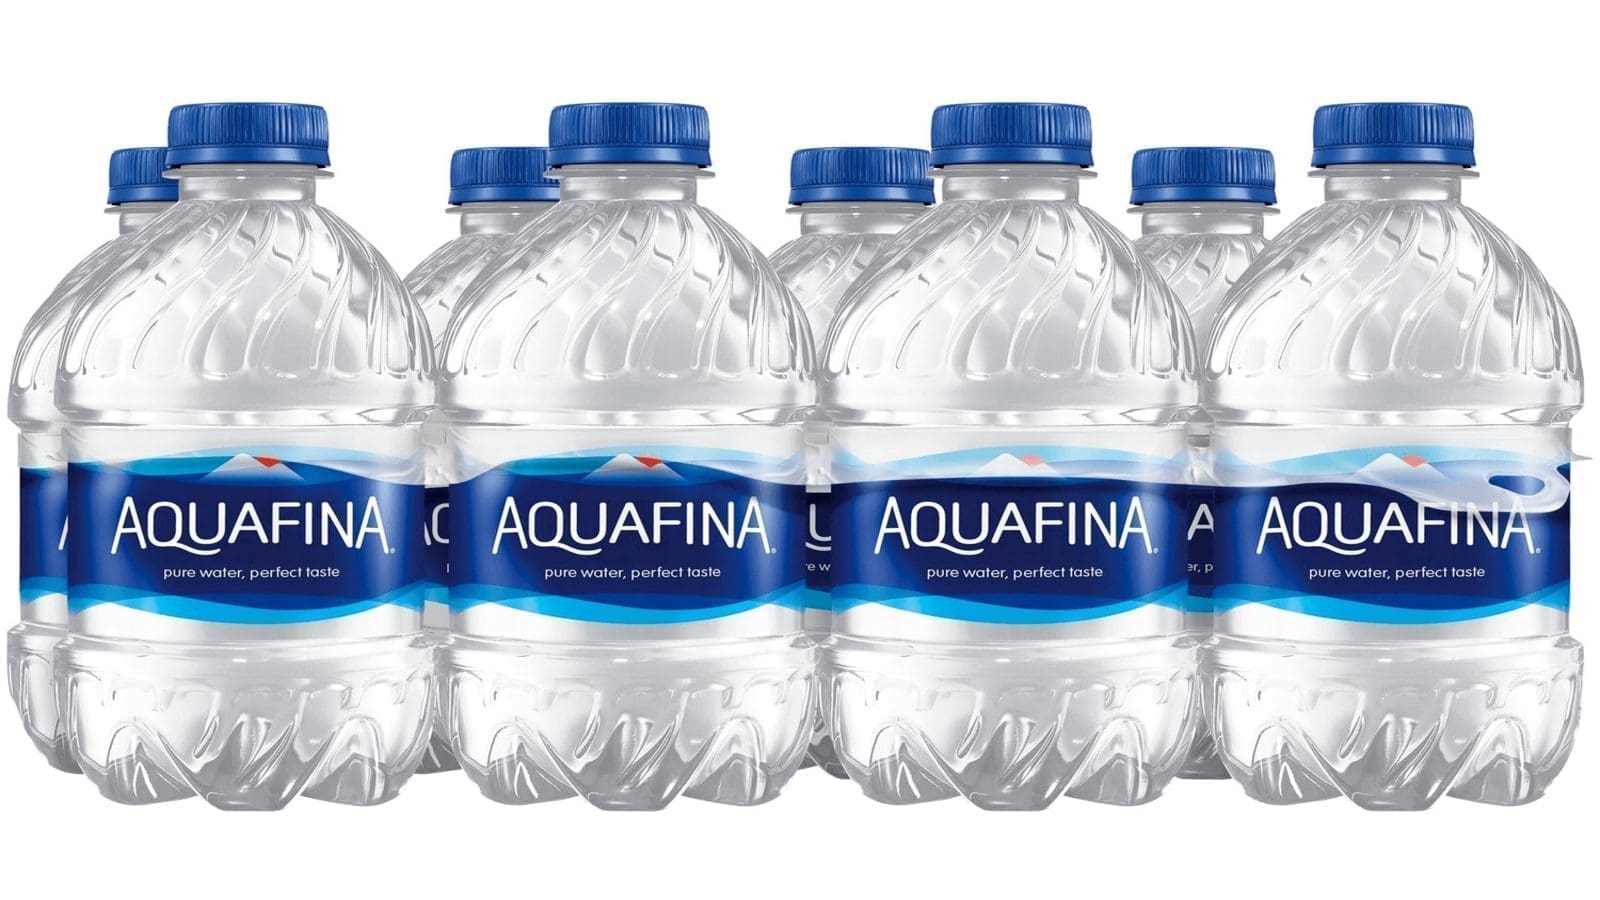 Crown Beverages Limited seeks to expand market share in Uganda’s bottled drinking water category with new water brand